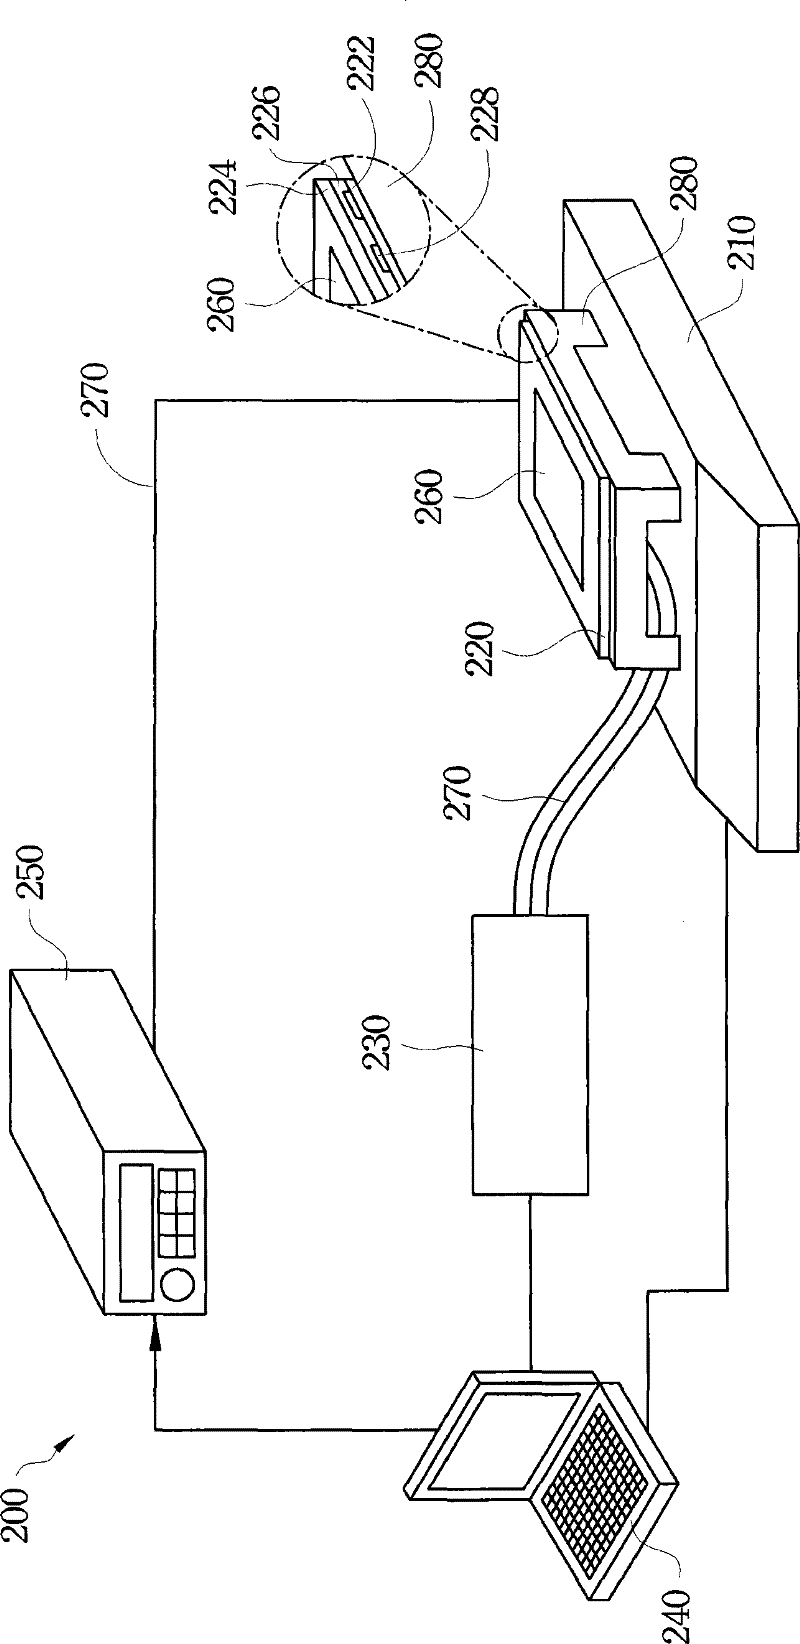 Simulated skin hot plate and textile rapid dry measuring apparatus using the same